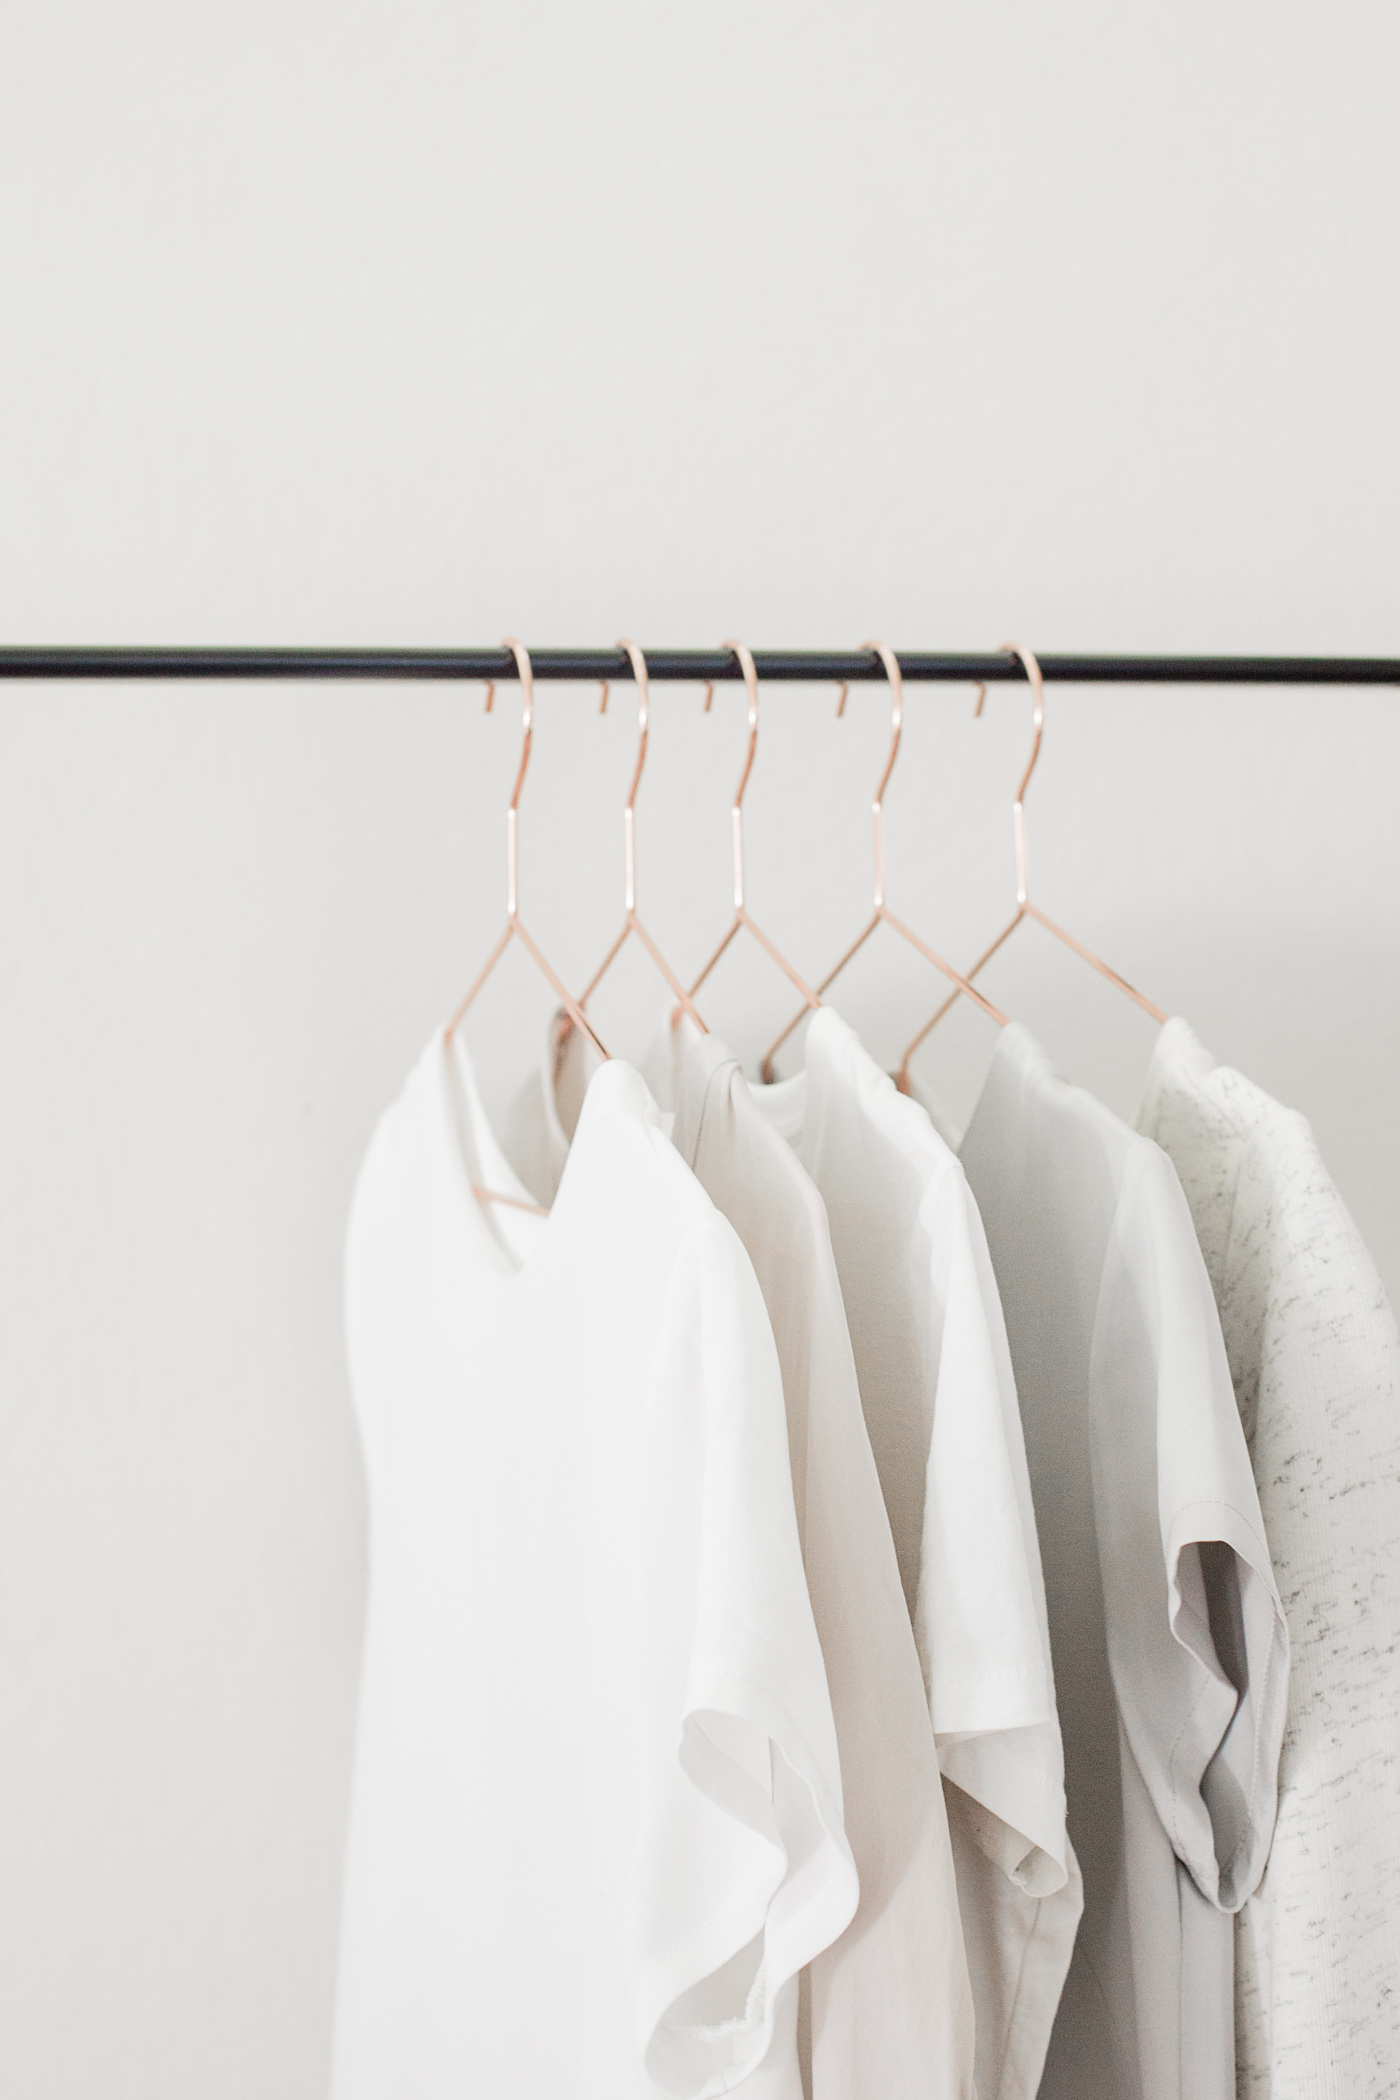 Maintaining your closet, tips & tricks to help your capsule wardrobe last longer.